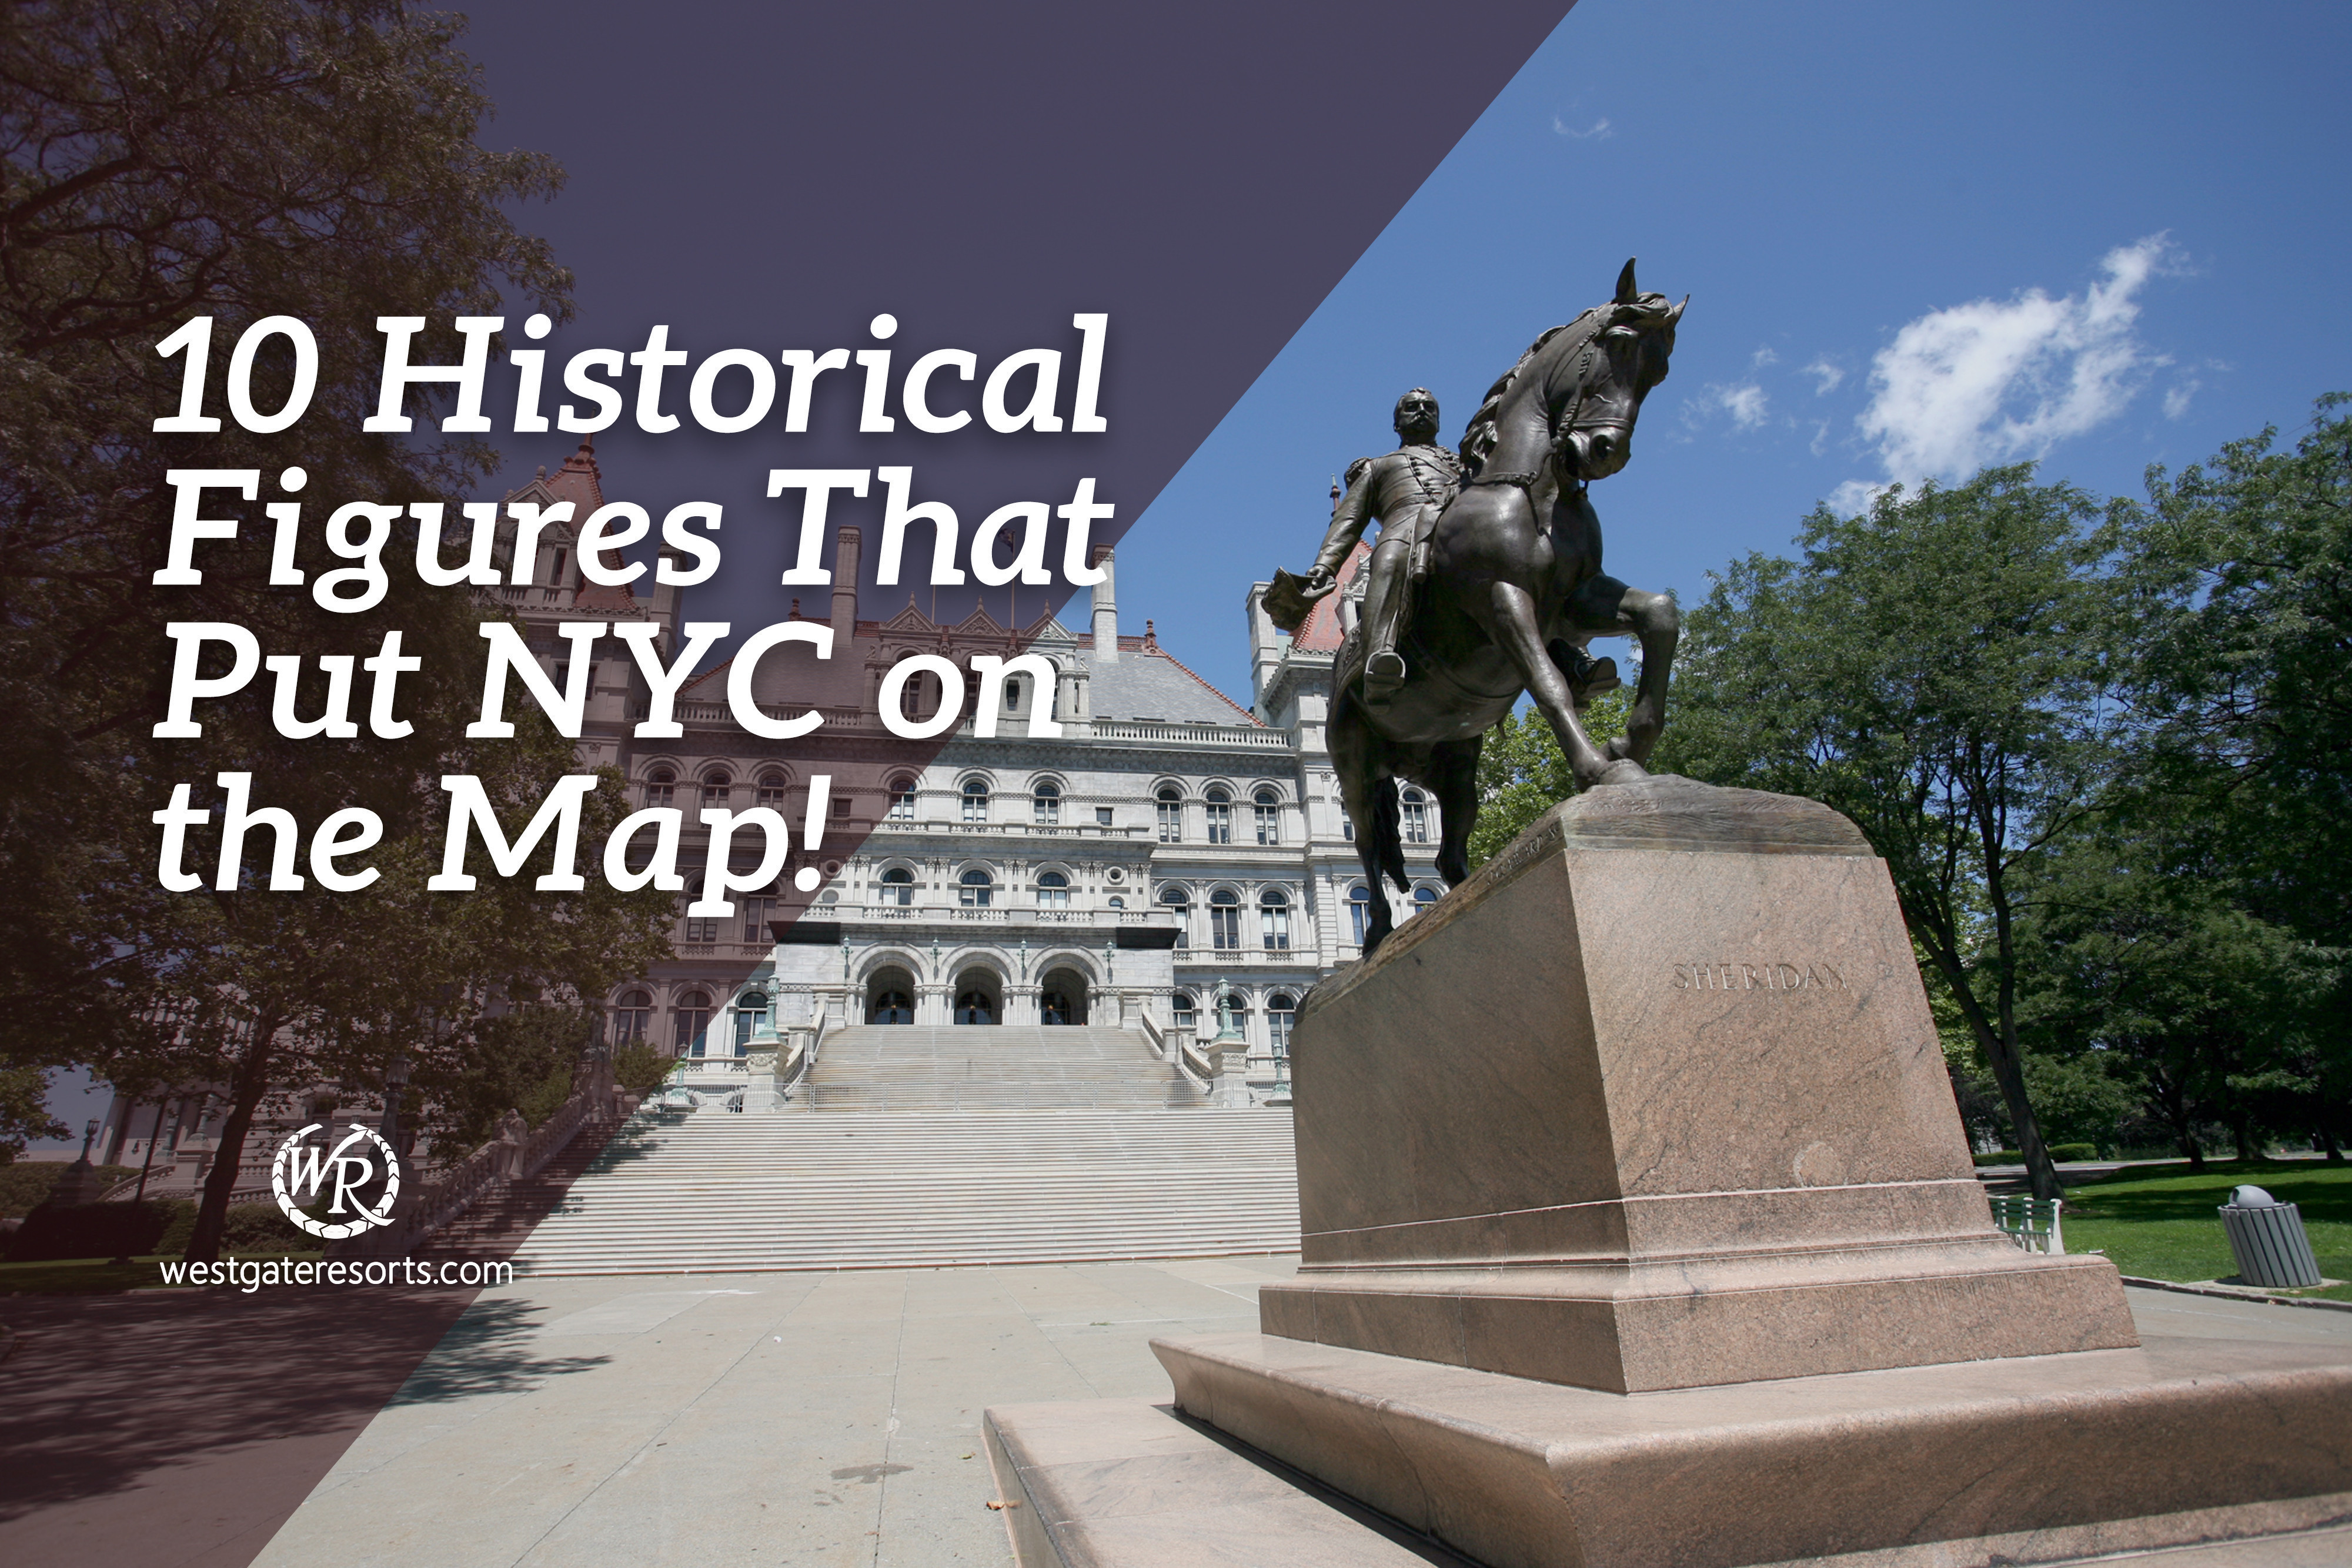 10 Historical Figures That put NYC on the Map!